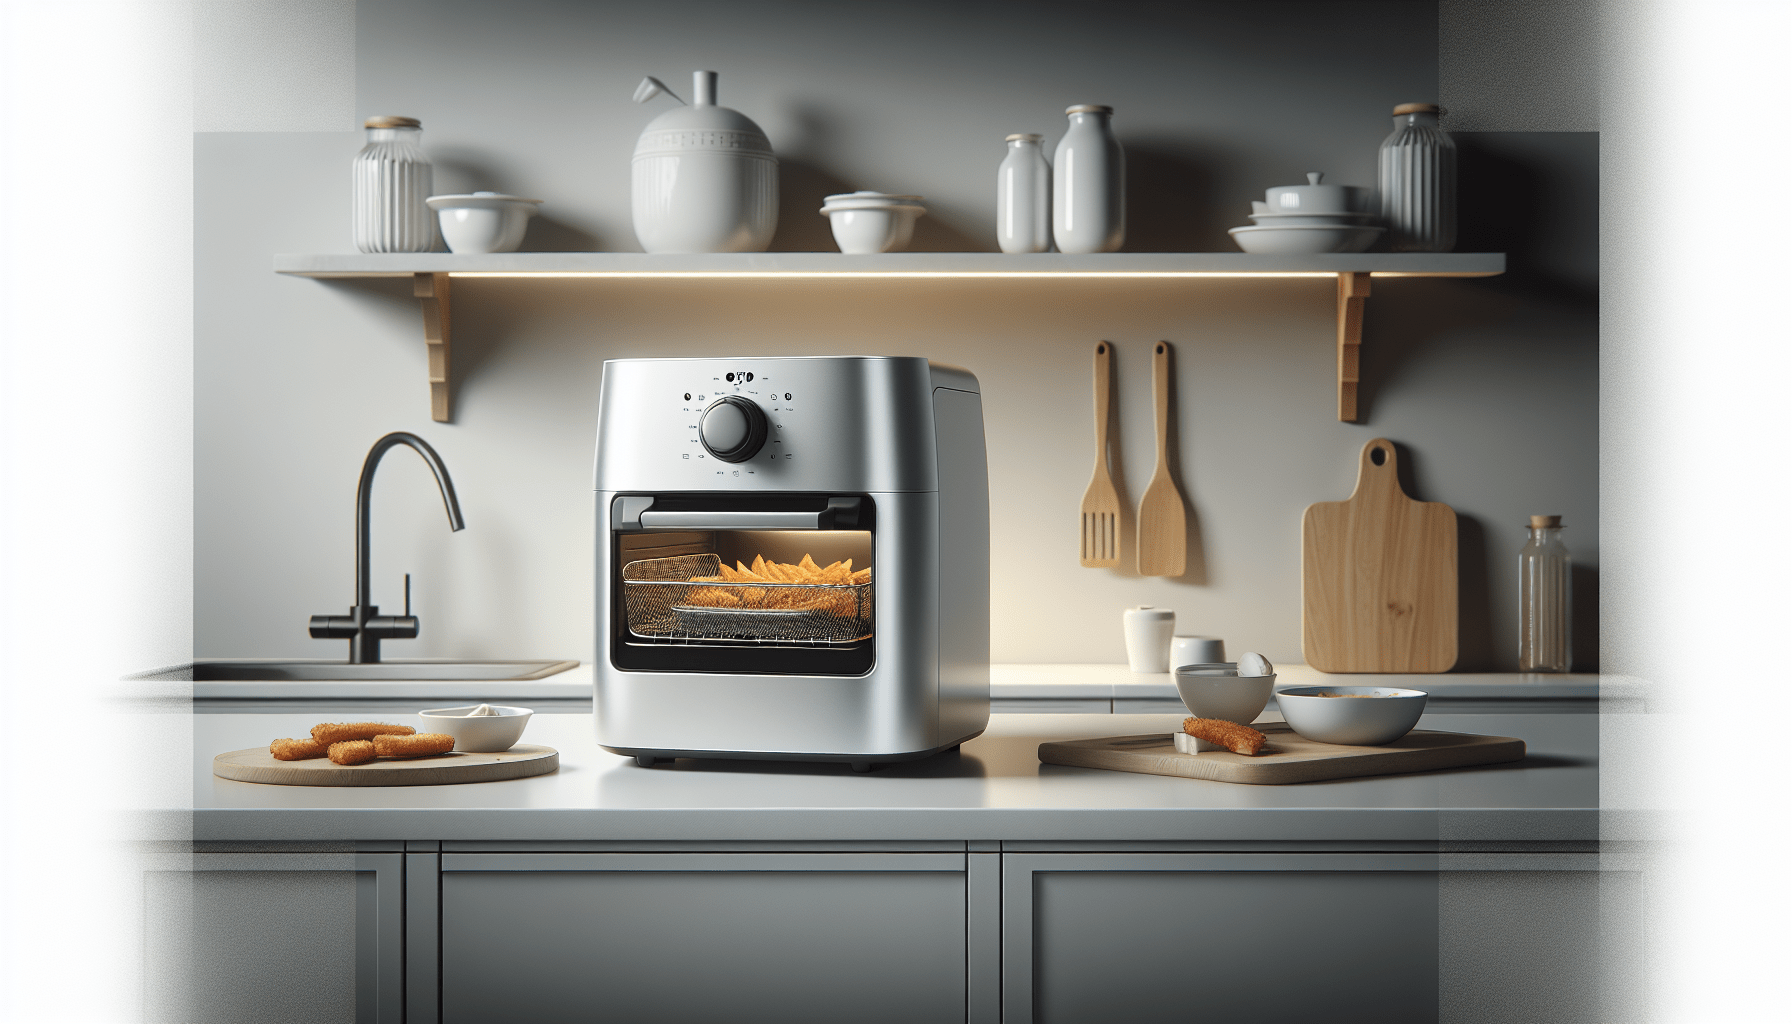 What Appliance Can Replace A Toaster Oven?